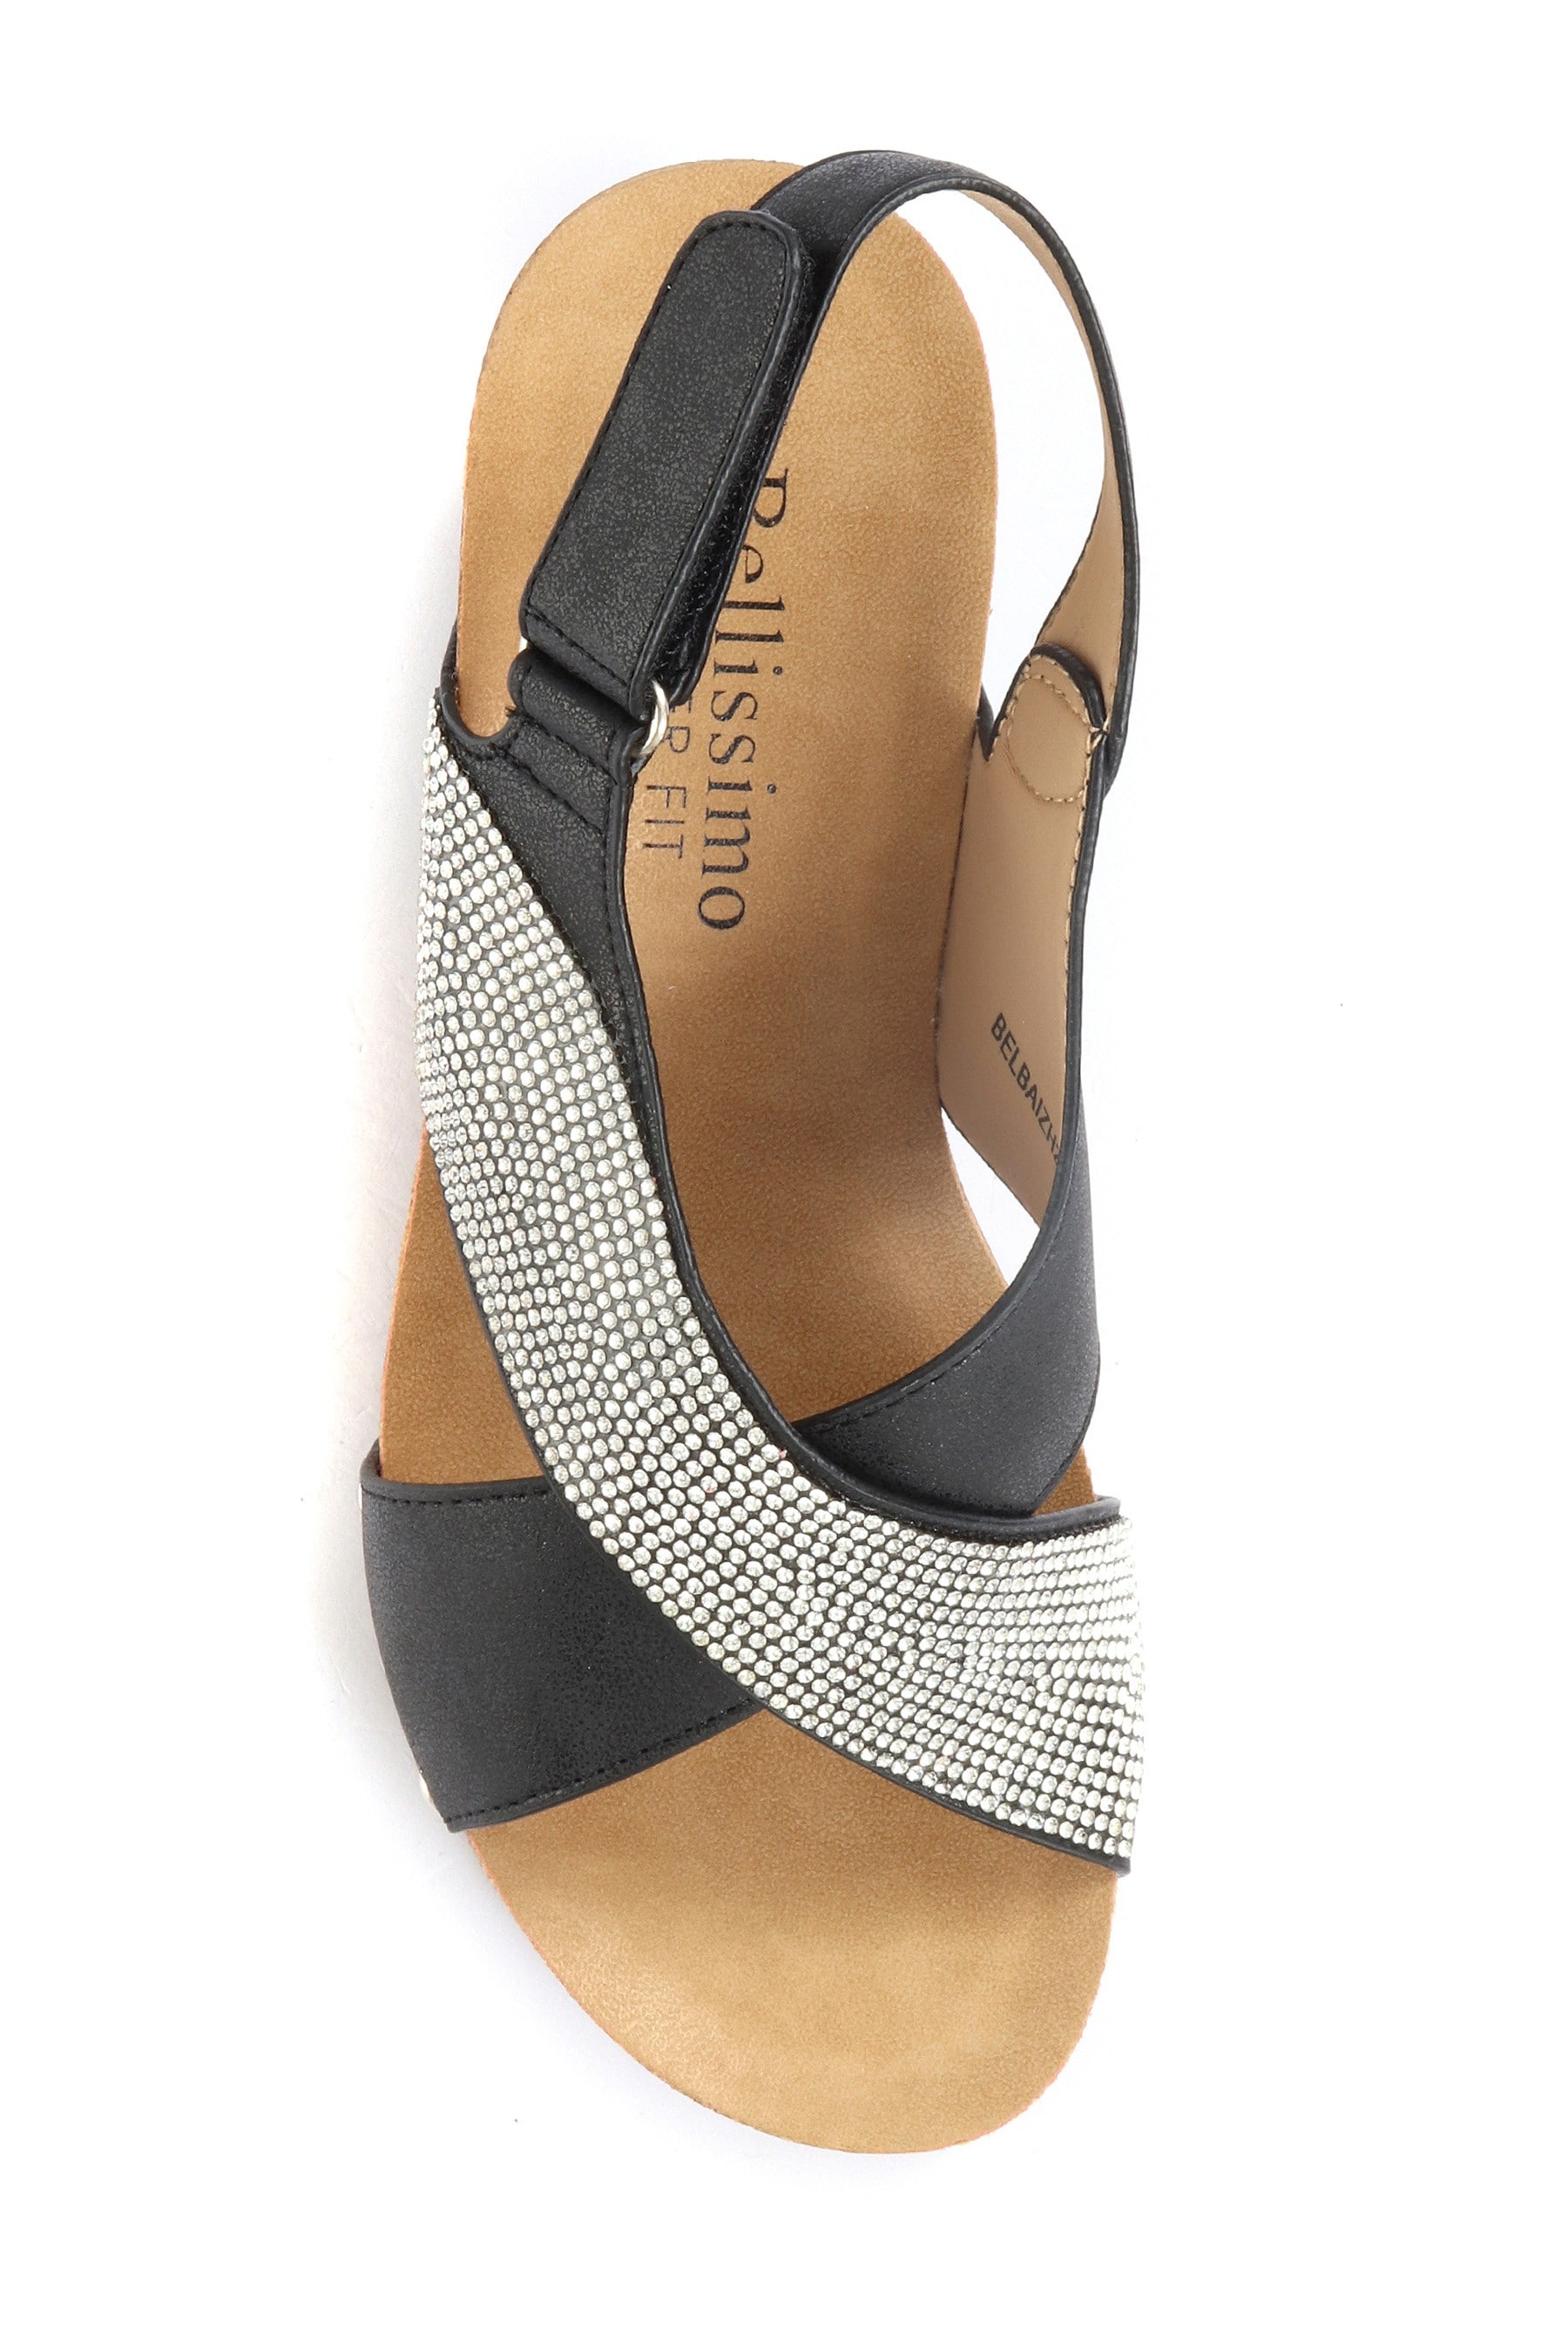 Buy Bellissimo Black Wide Fit Wedge Sandals from the Next UK online shop